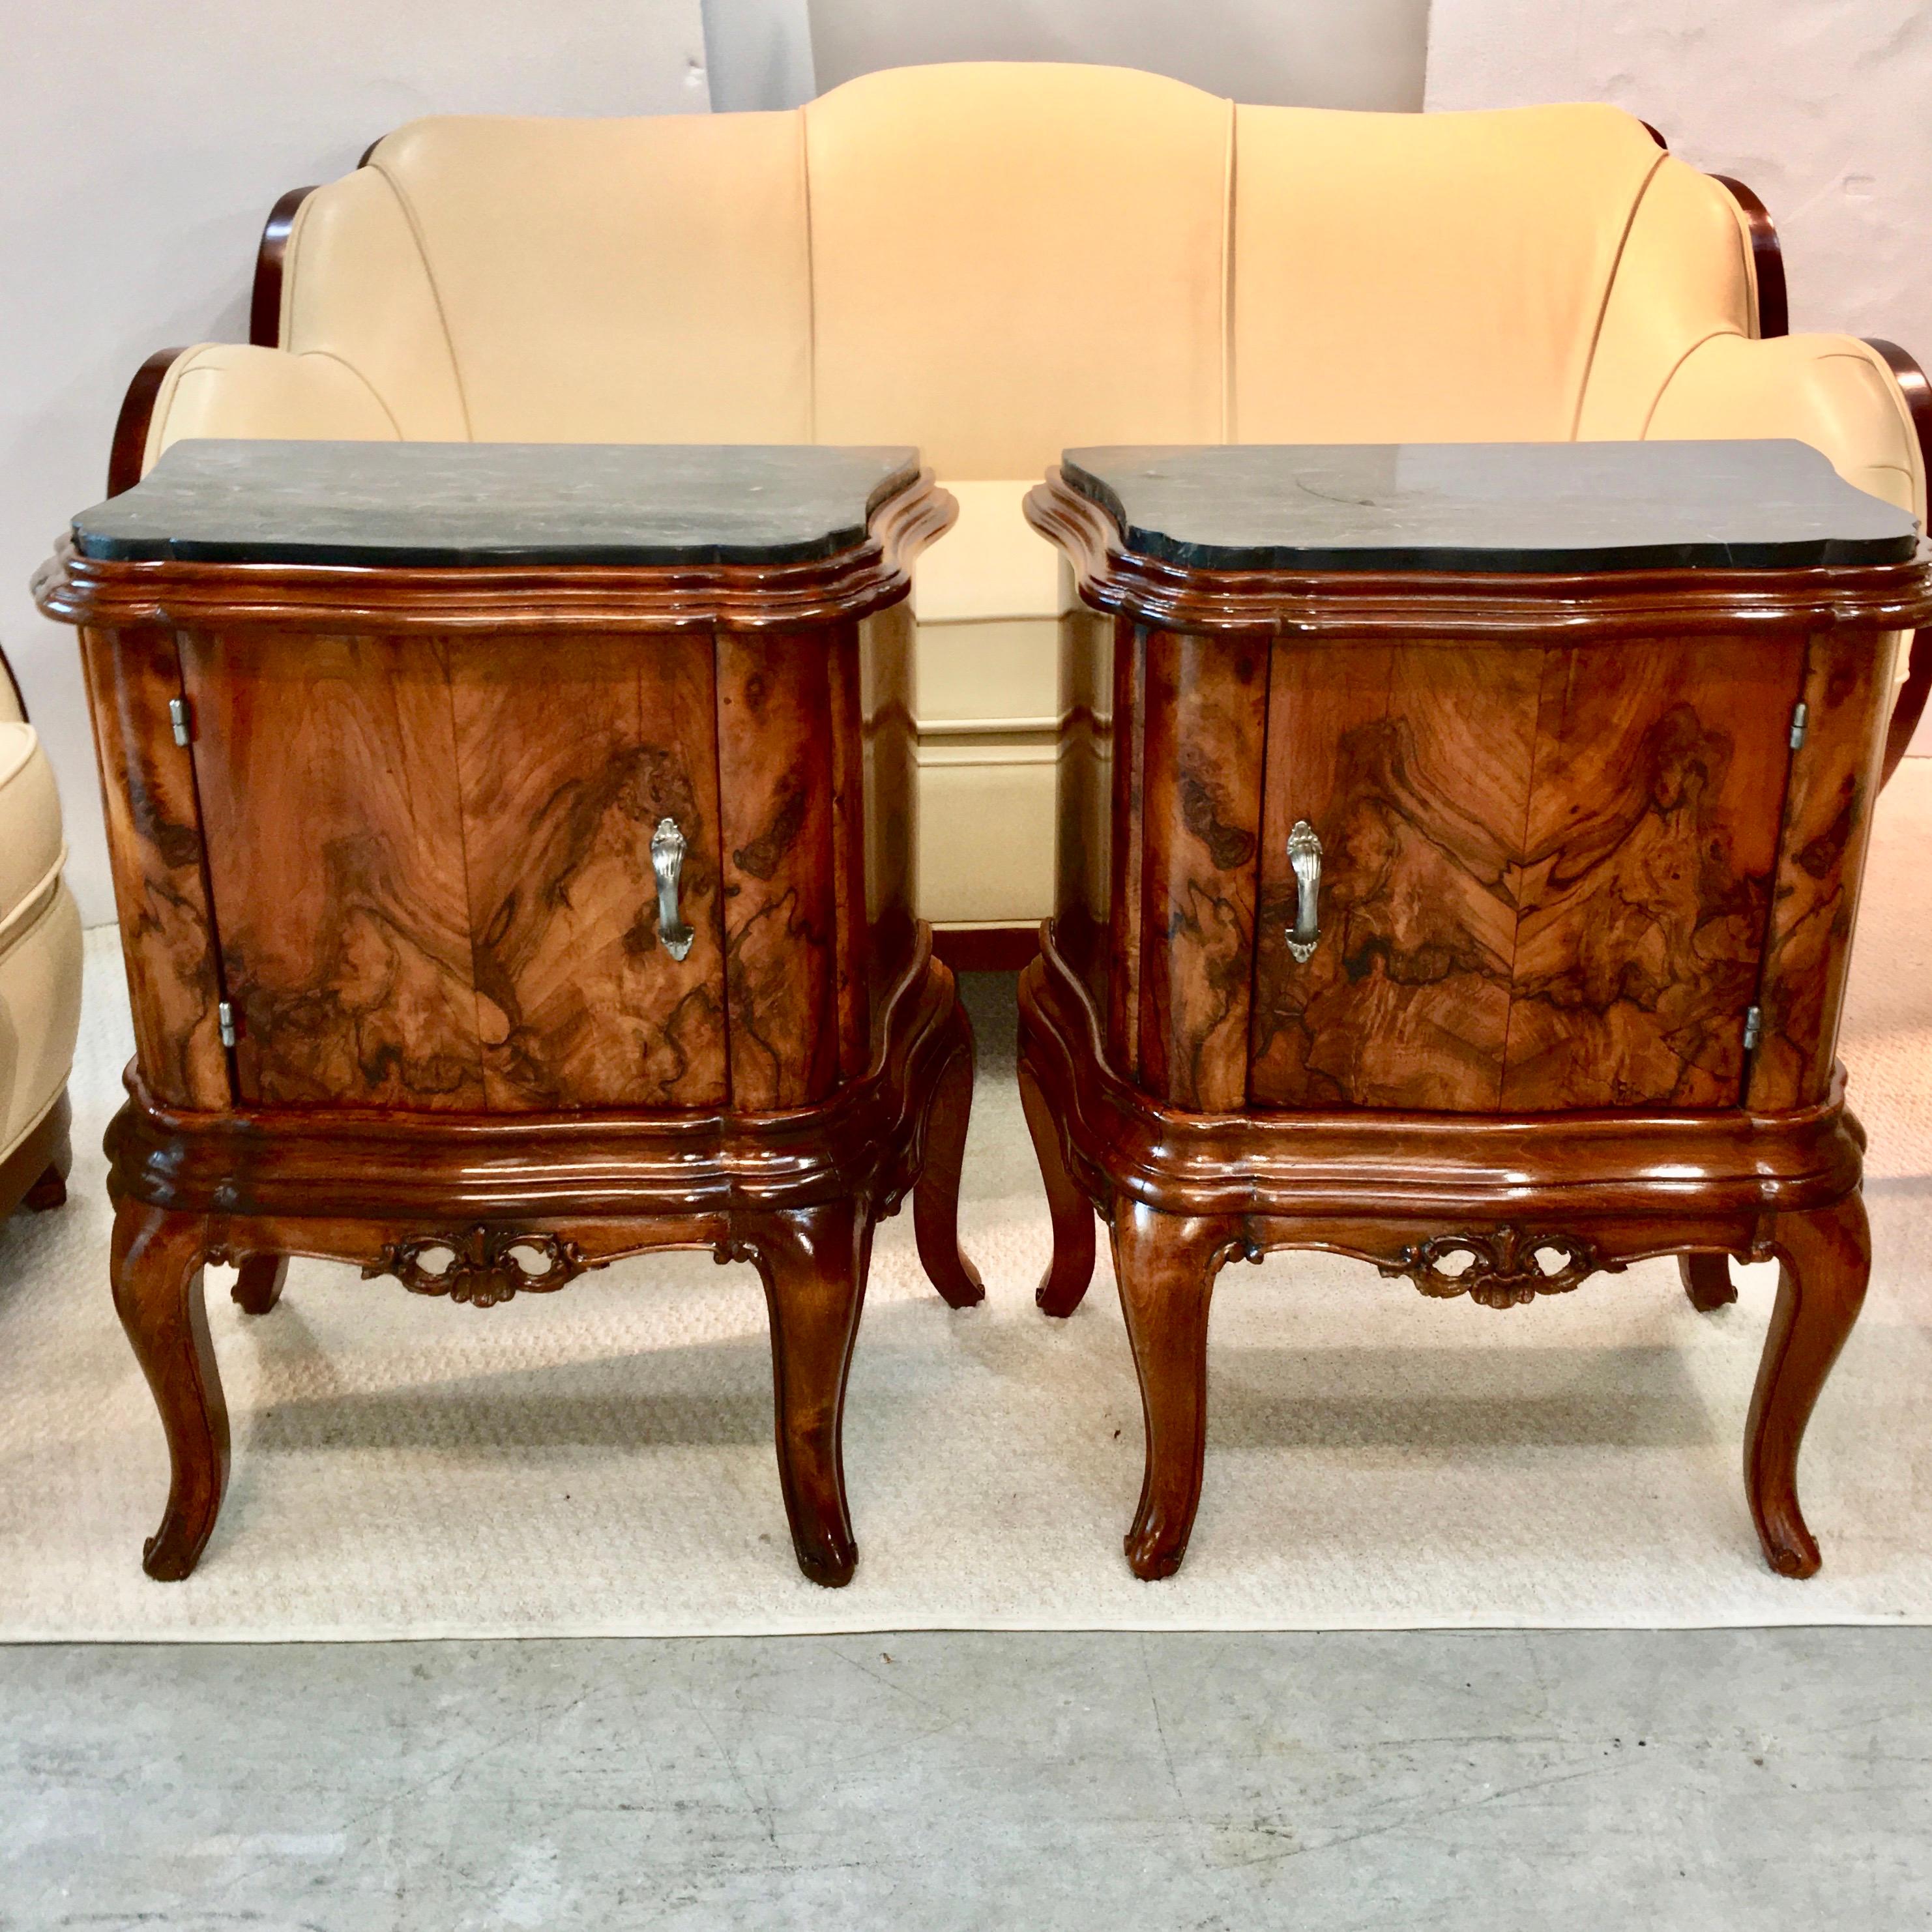 Rococo Revival Pair of Italian Serpentine Nightstands with Marble Tops